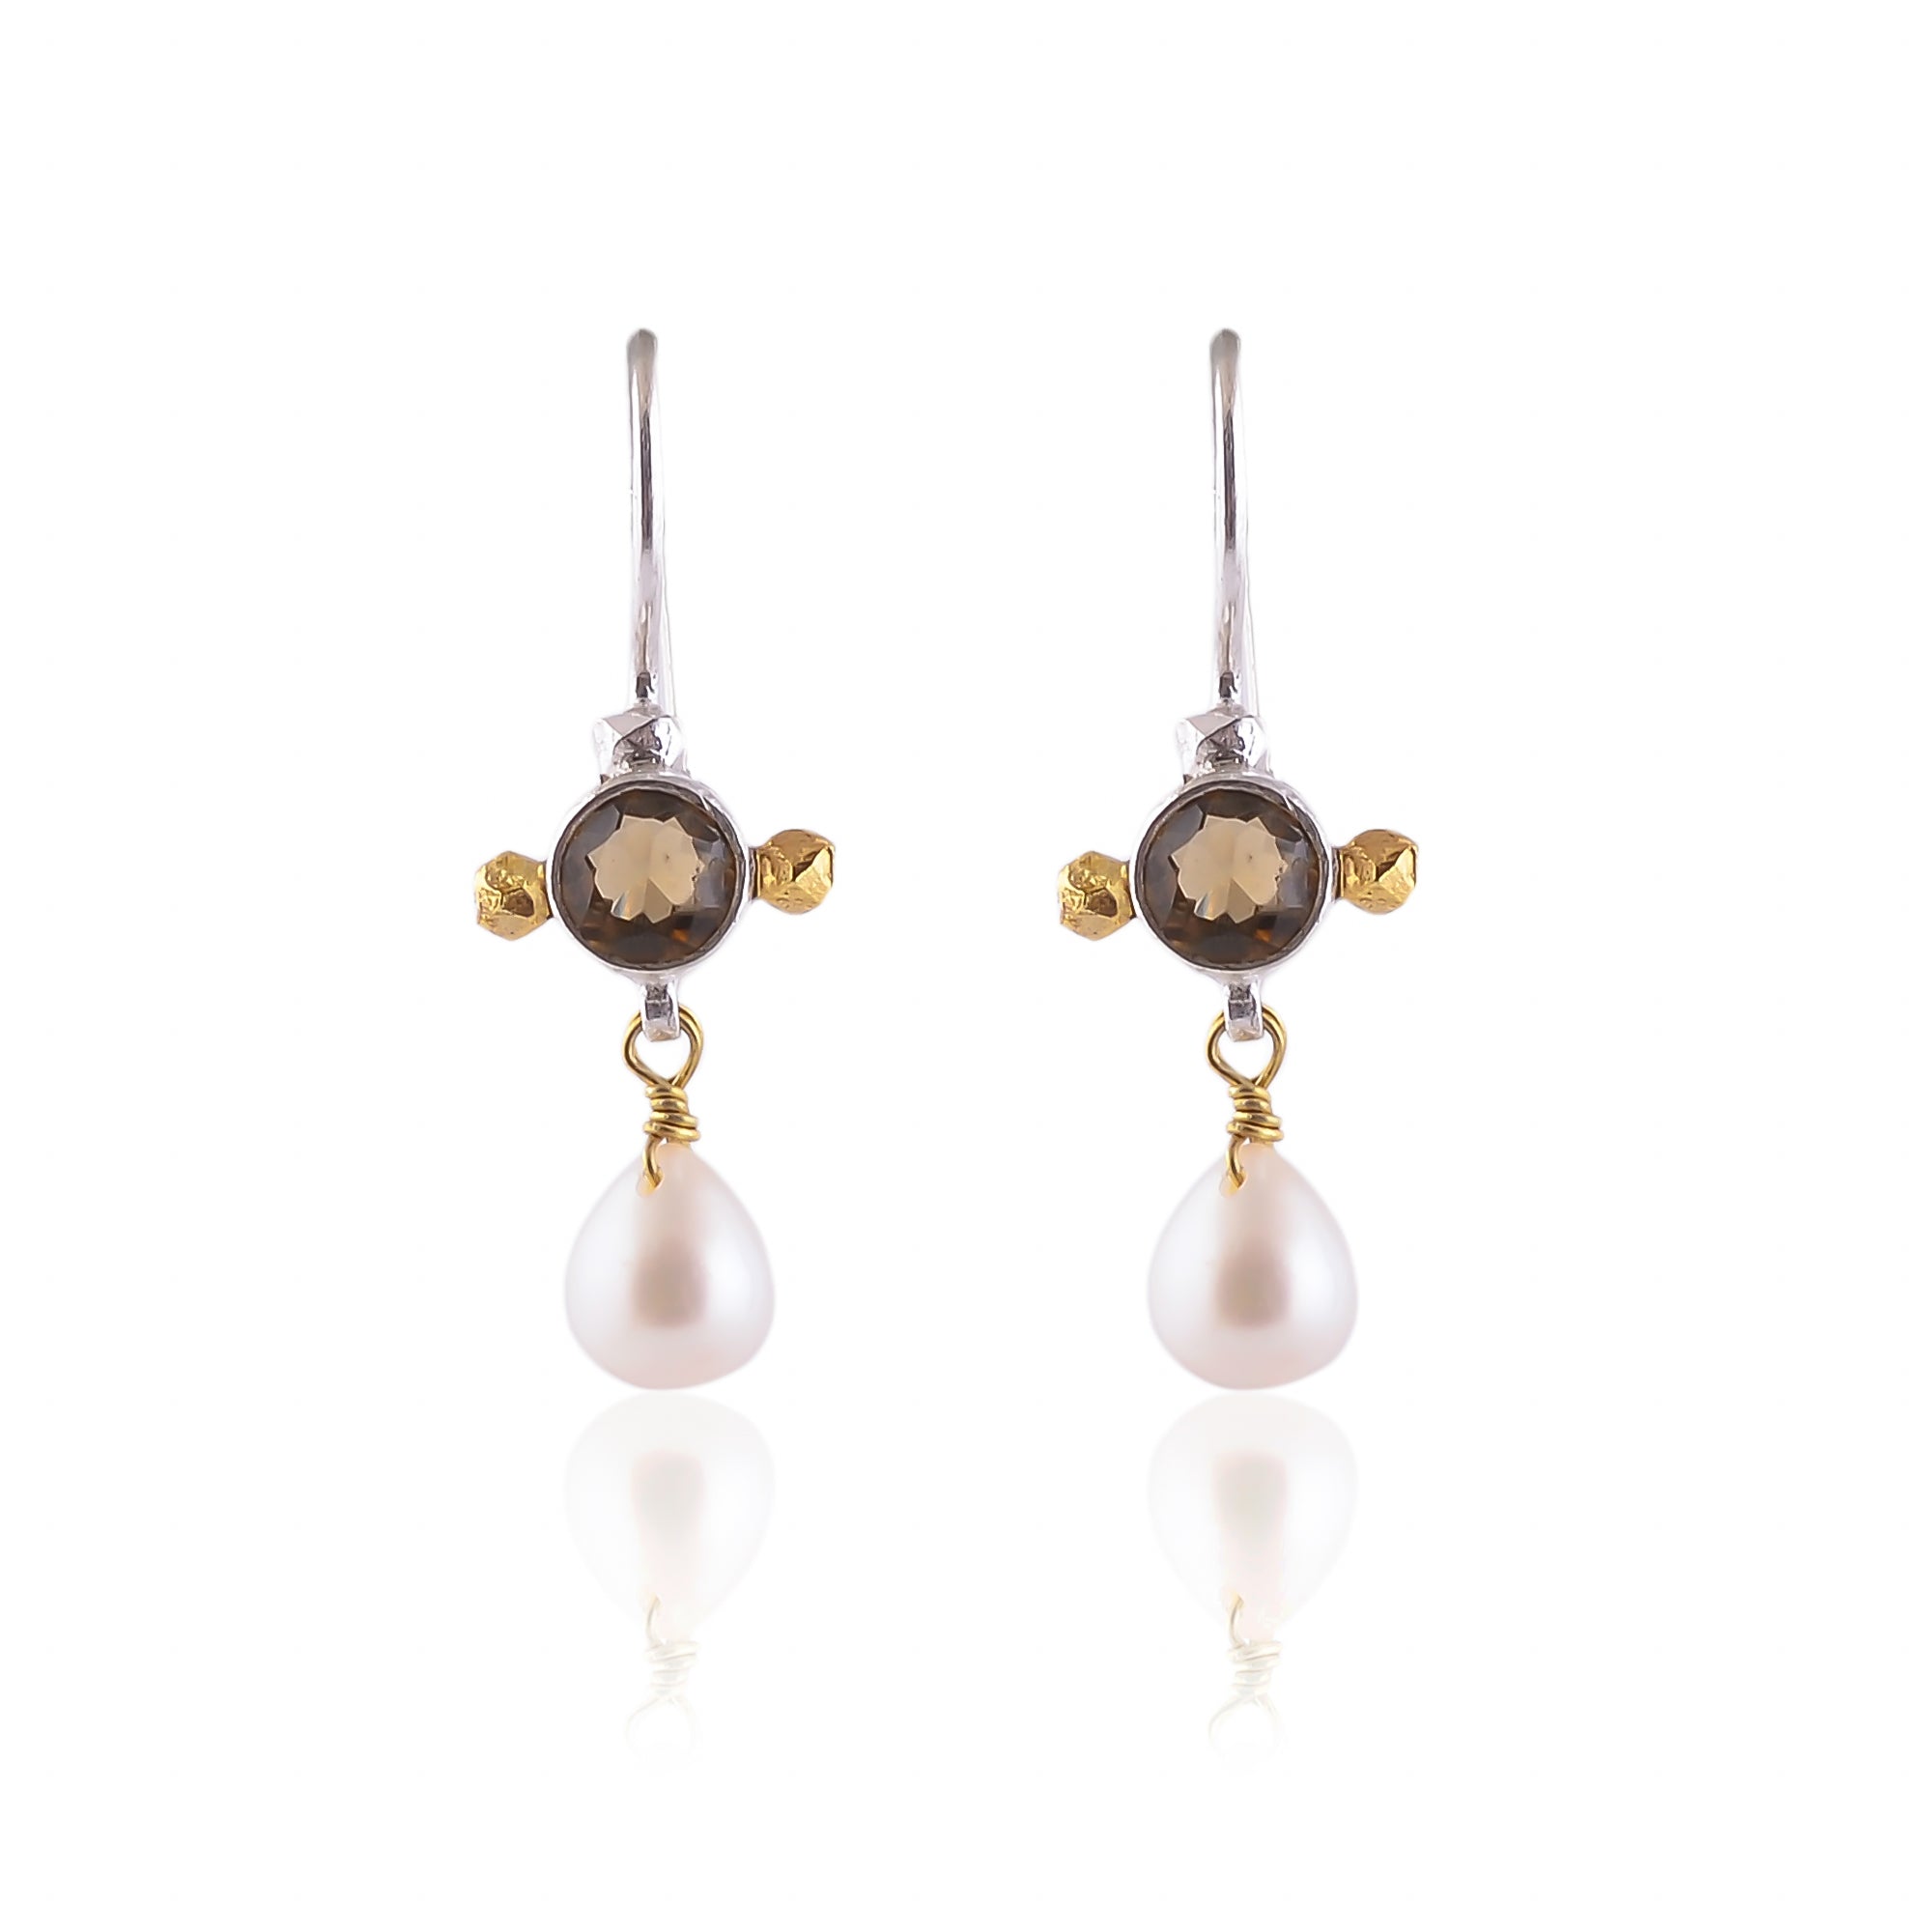 Buy Handmade Silver Citrine With Pearl Drop Earring